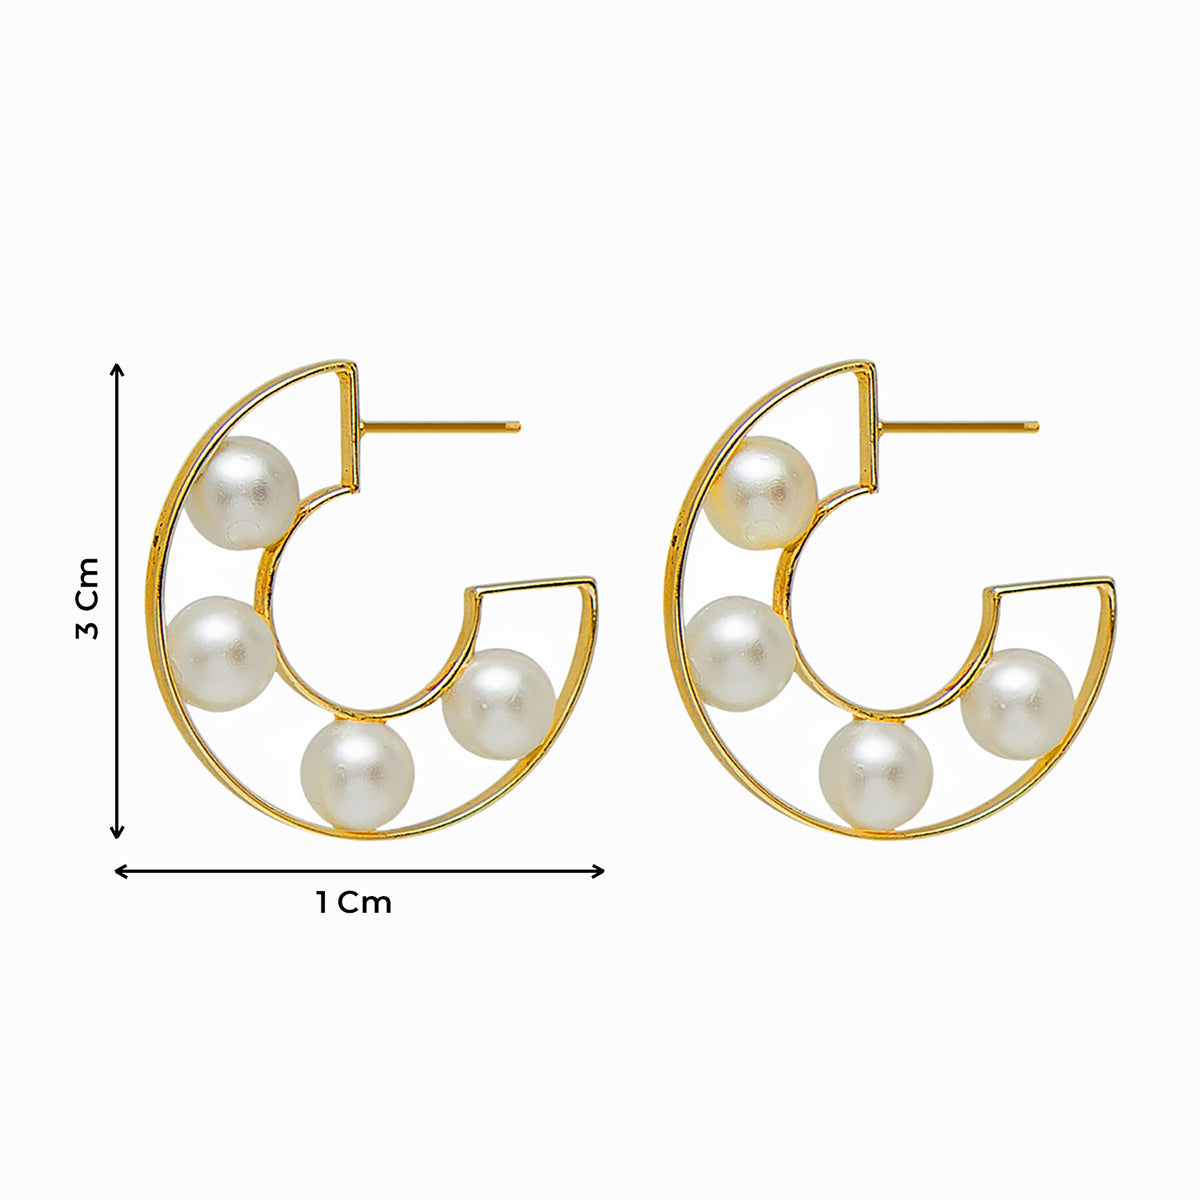 Statement Gold Festive Hoops with Pearls